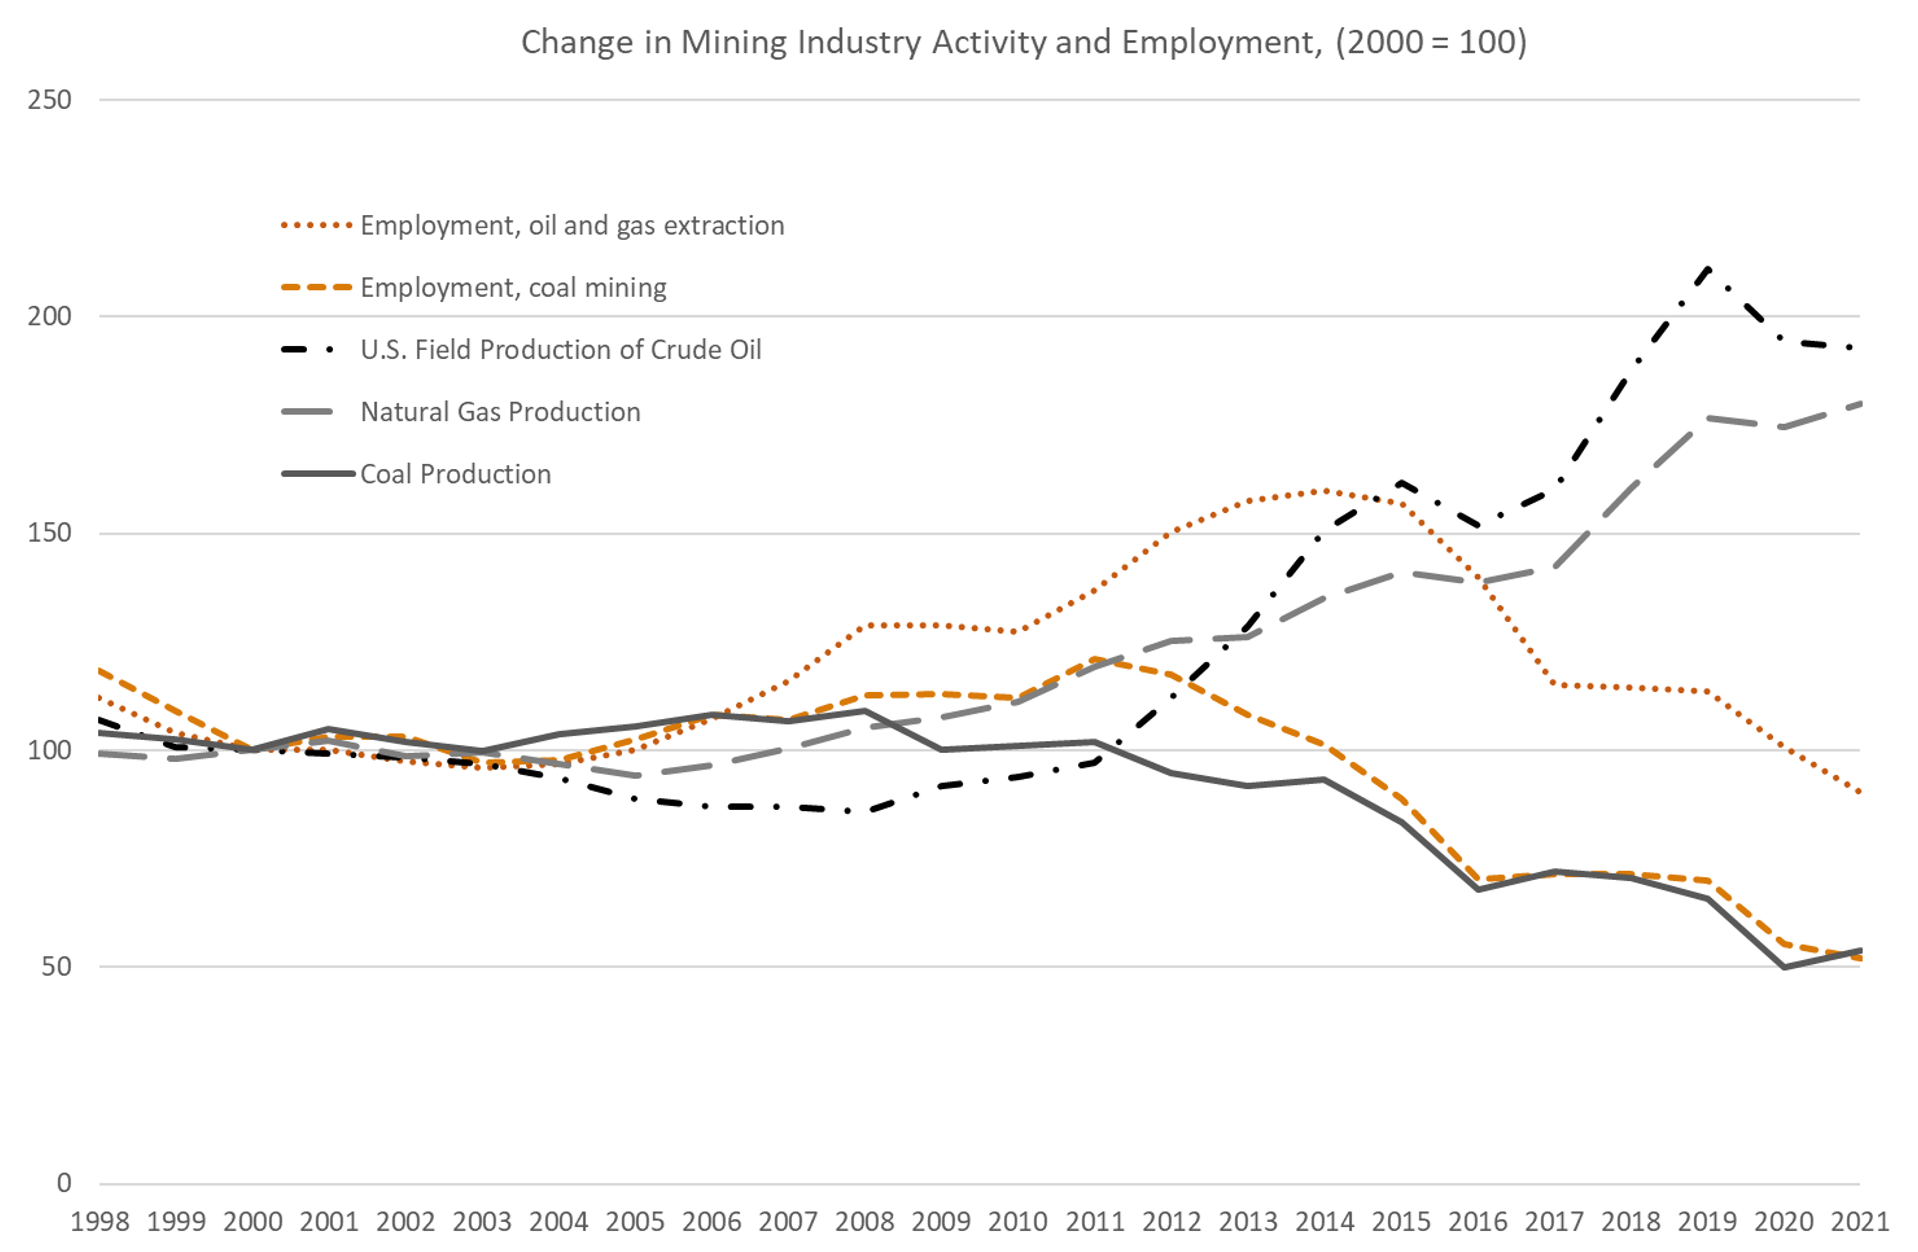 Figure 4. Mining Activity and Employment, 1998-2021. See accessible link for data.